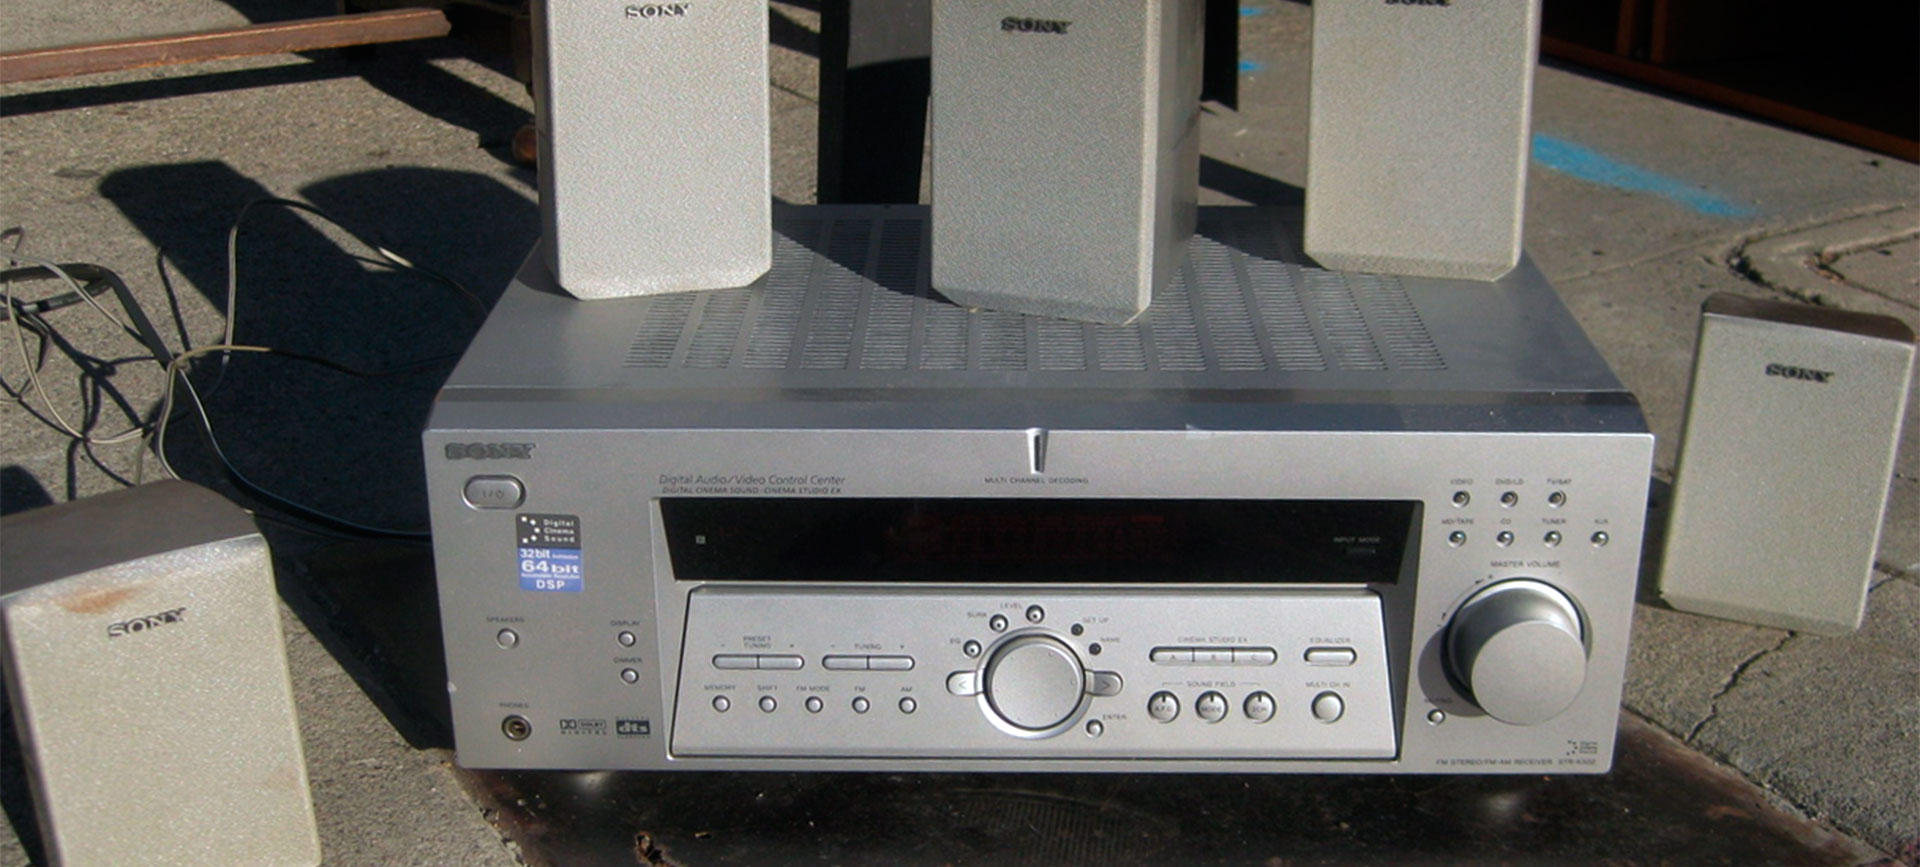 5.1 channel receivers